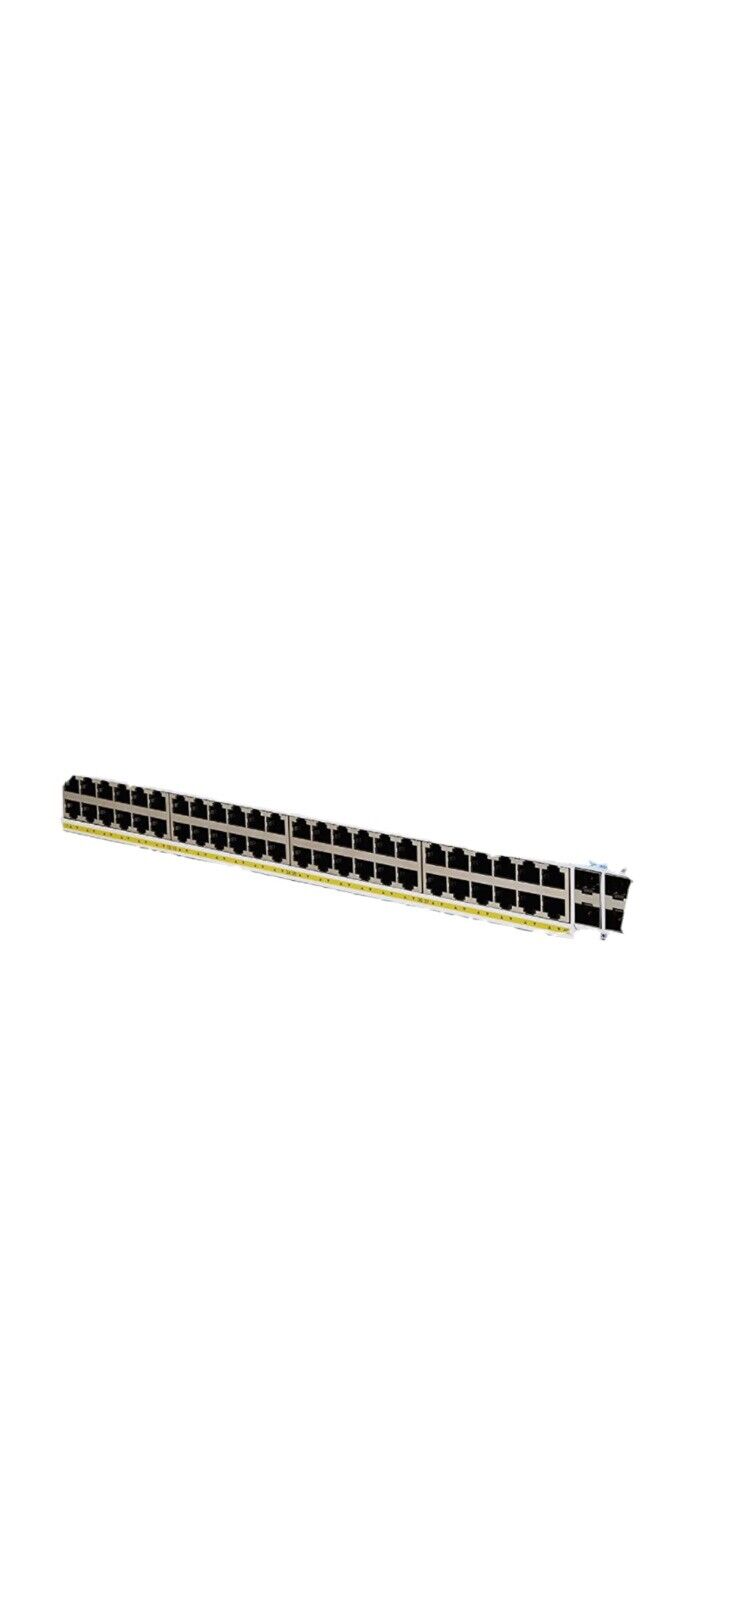 New Sealed Cisco CBS350-48P-4X 48 Ports PoE Managed Switch,Ships TODAY